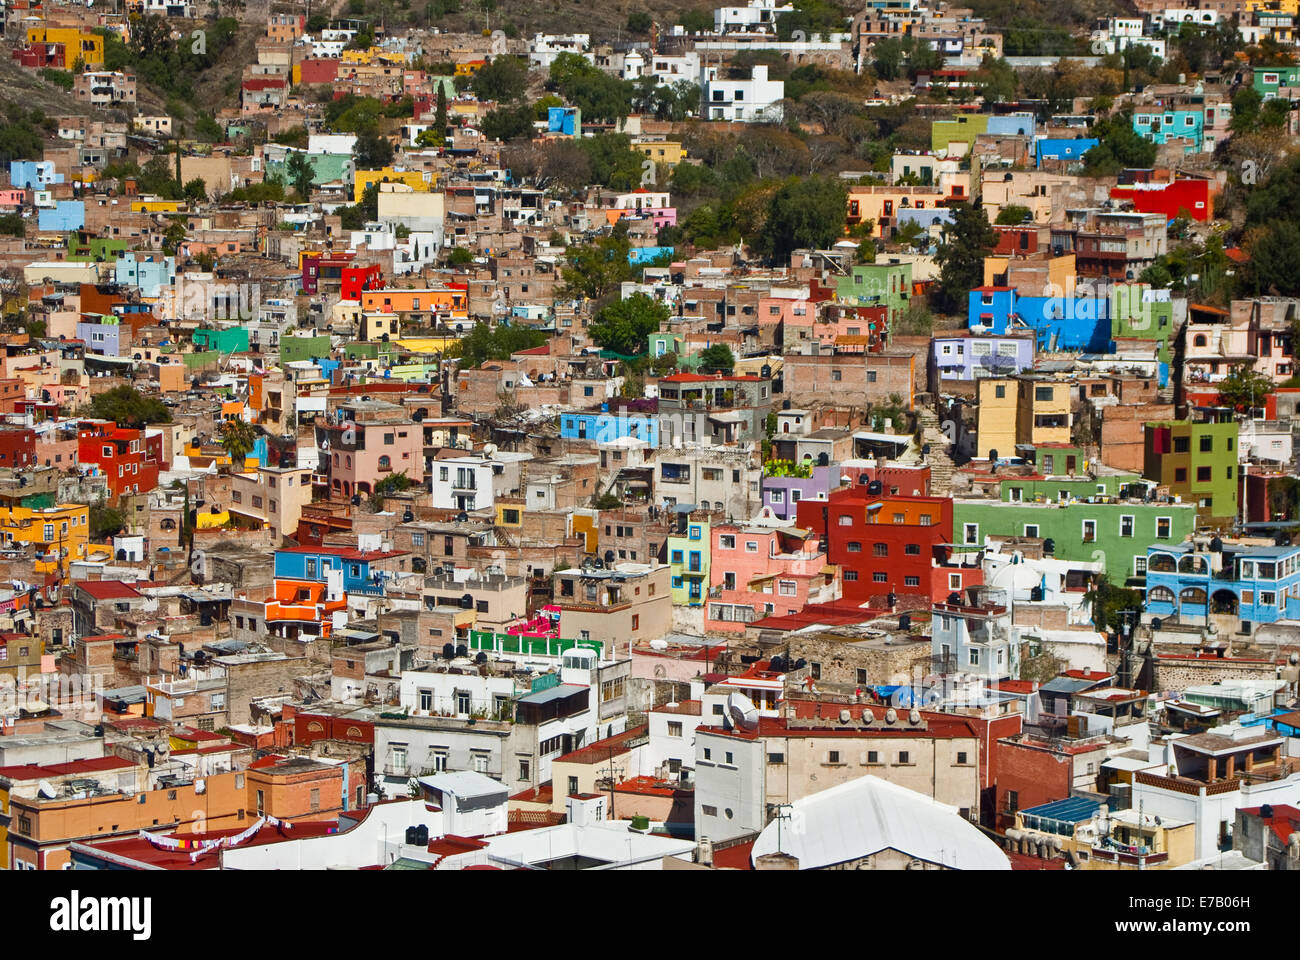 GUANAJUATO, MEXICO – Guanajuato World Heritage Site, historic city view of 16th century buildings and houses of vivid colors Stock Photo